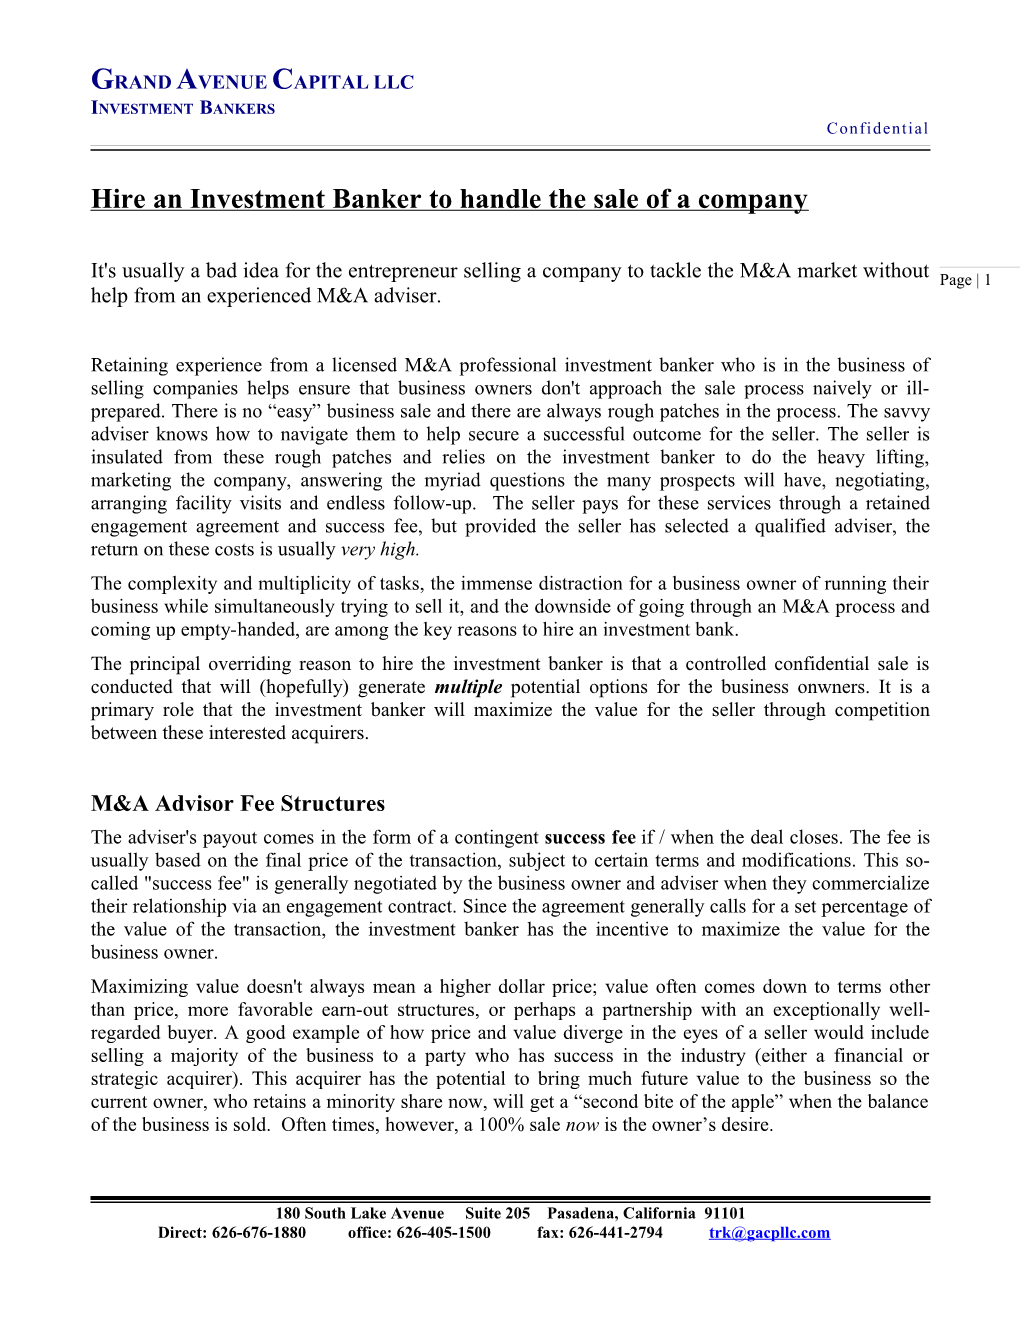 Hire an Investment Banker to Handle the Sale of a Company